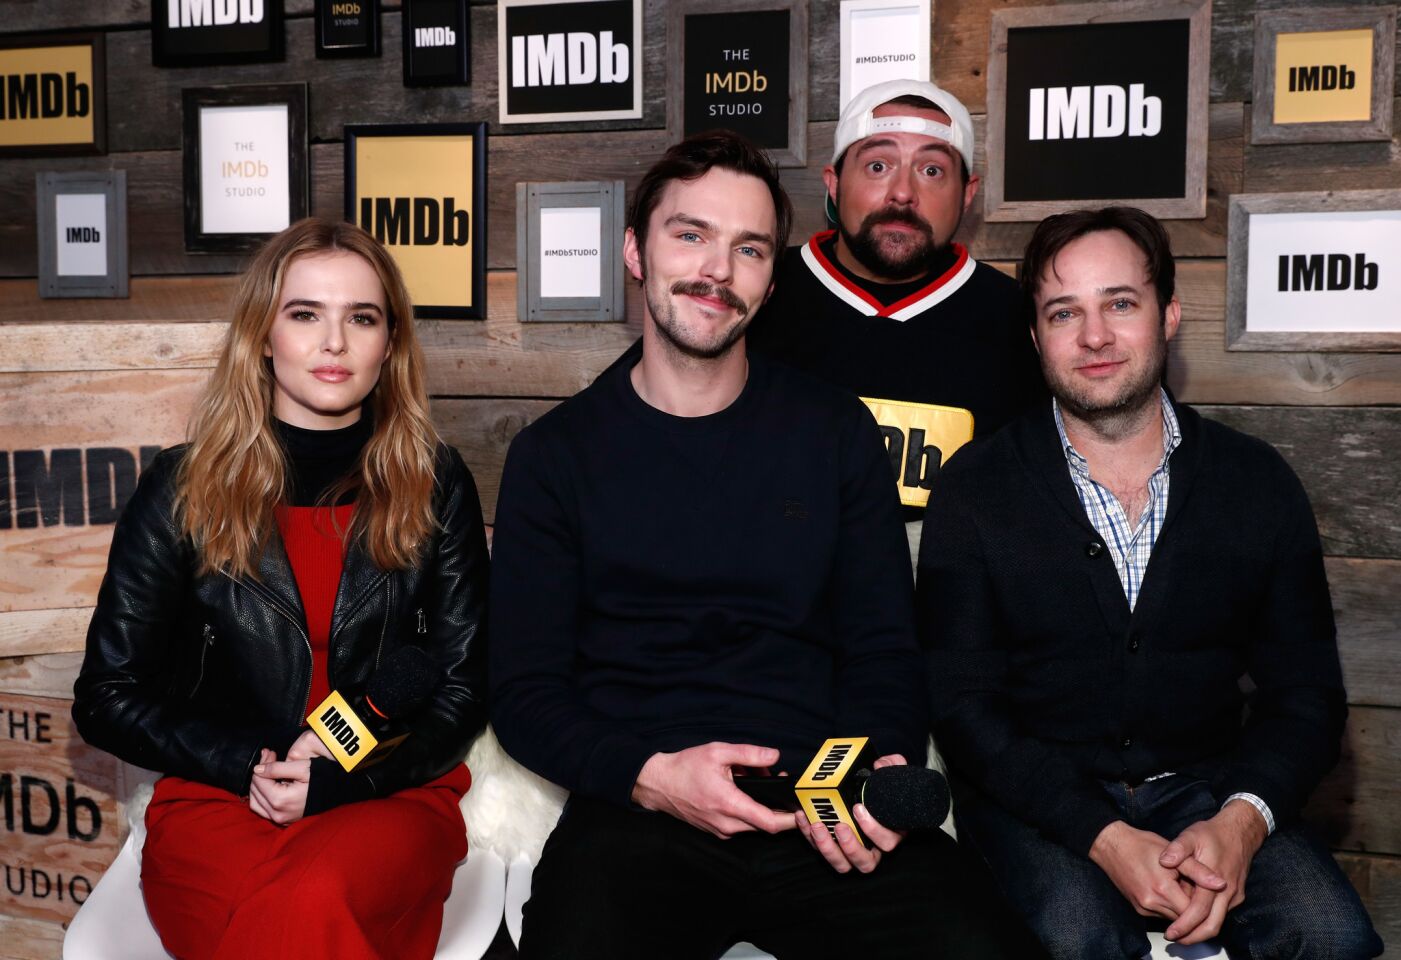 Actors Zoey Deutch and Nicholas Hoult, director Danny Strong of "Rebel in the Rye" and Kevin Smith, top, attend the IMDb Studio featuring the Filmmaker Discovery Lounge.